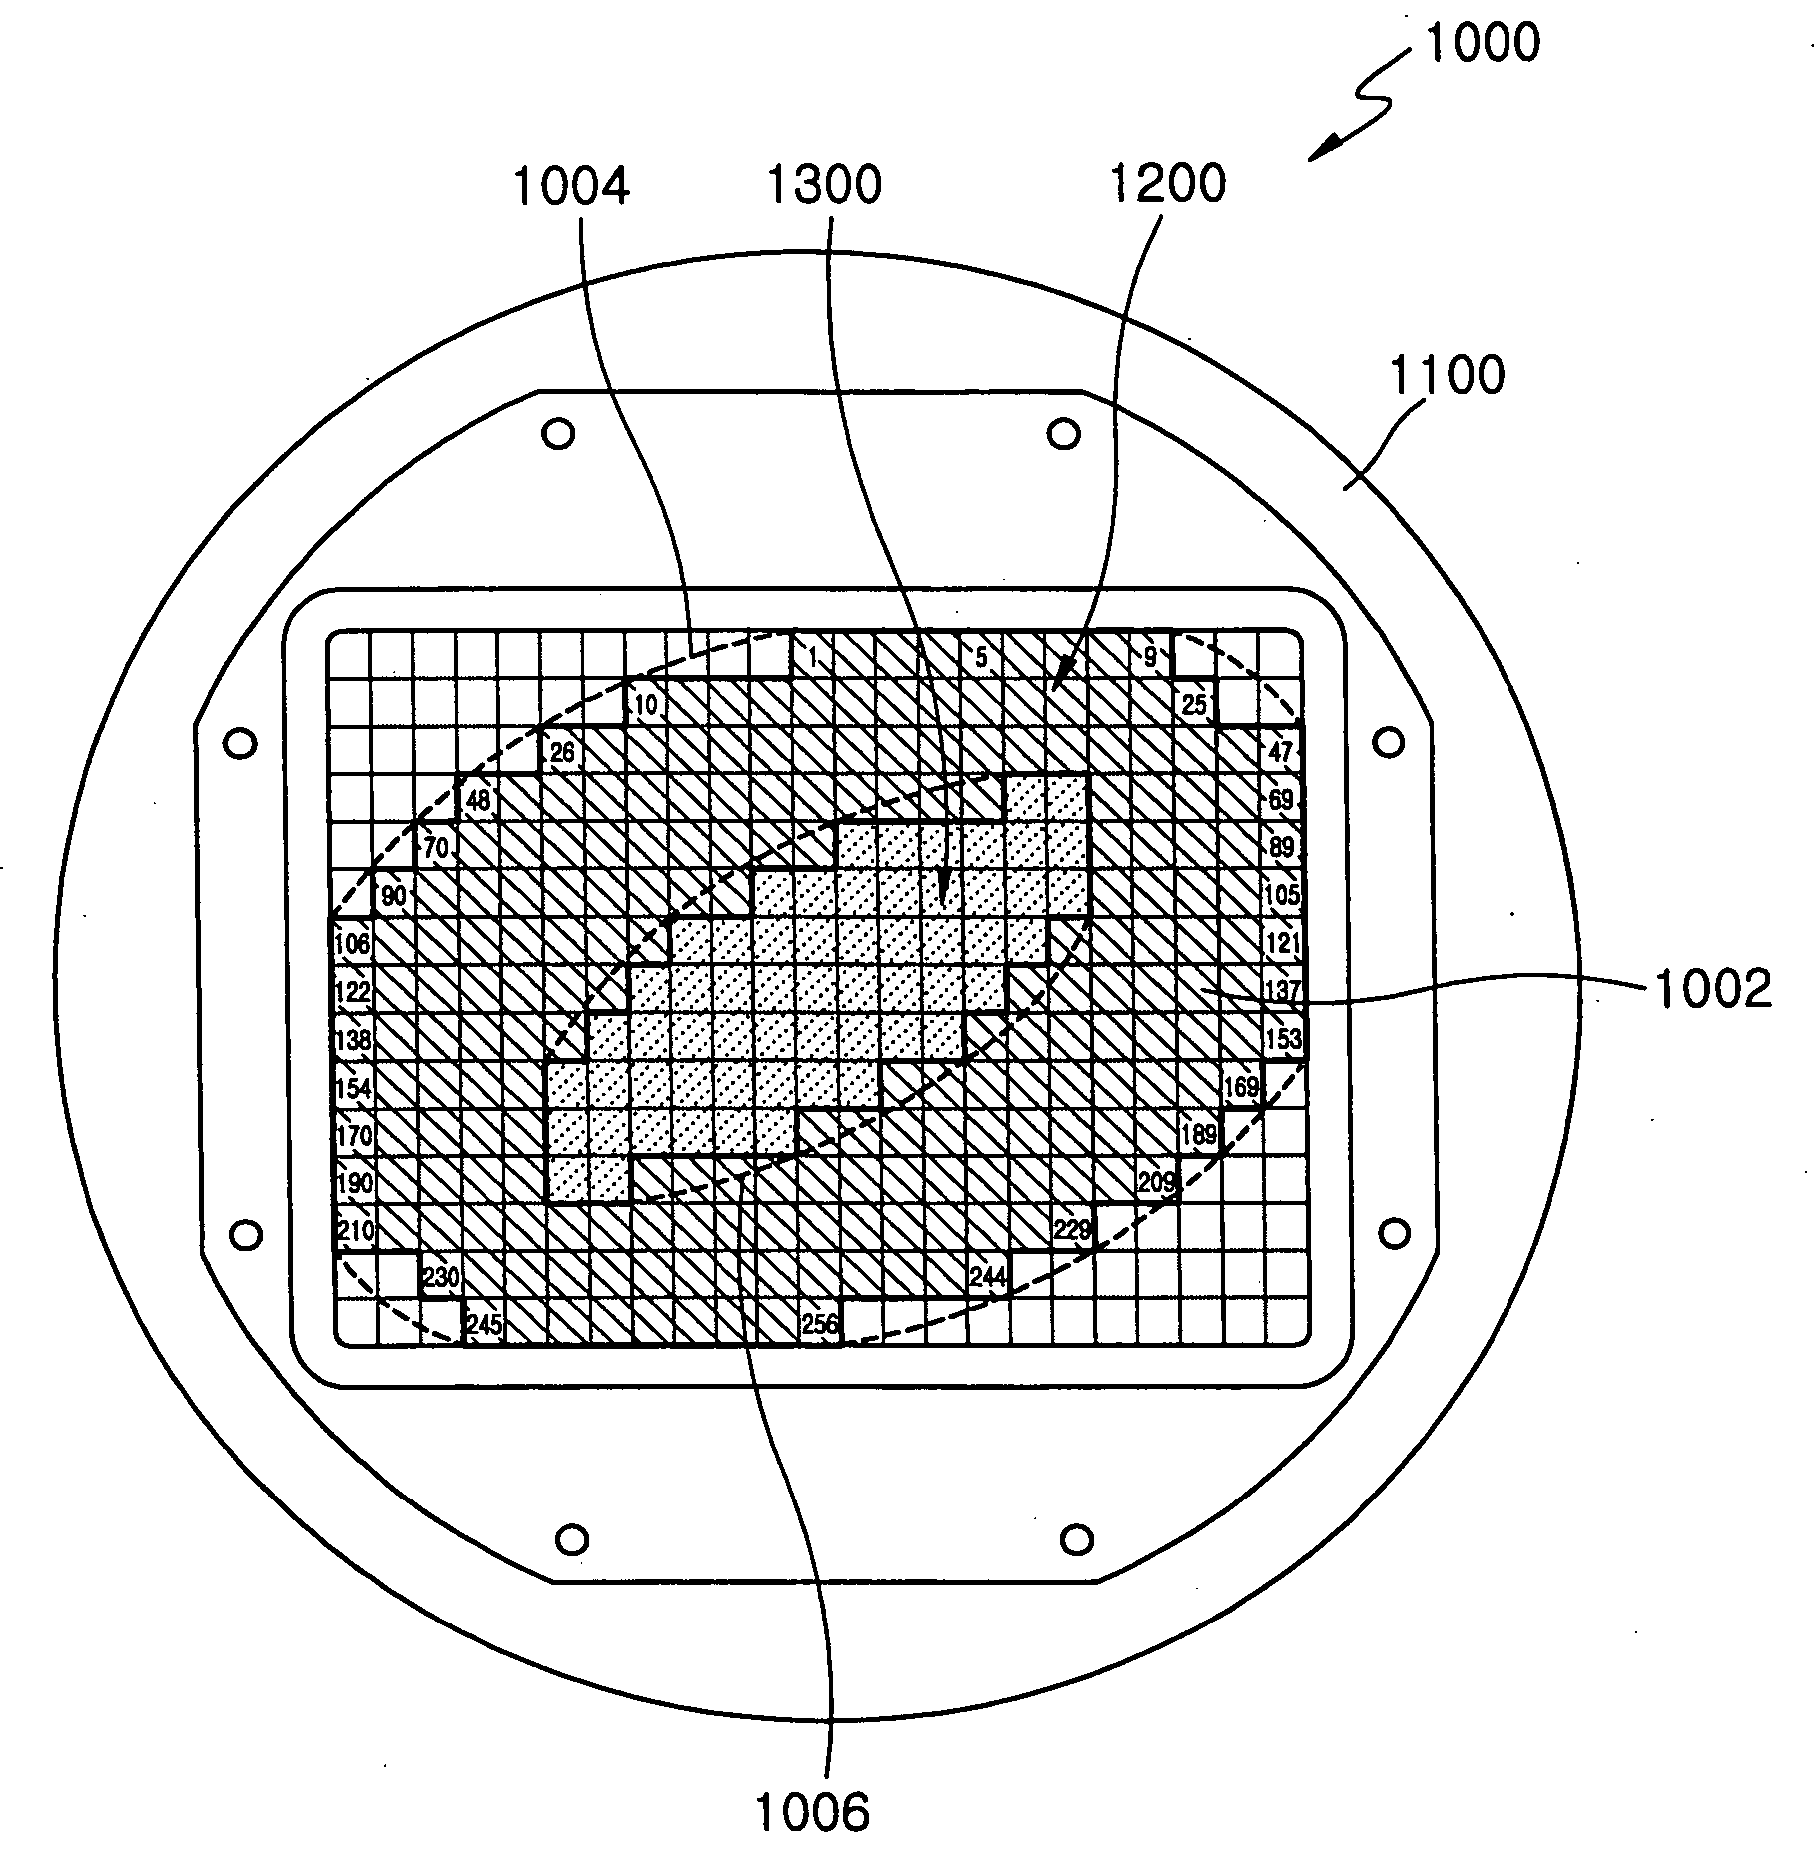 Donut-type parallel probe card and method of testing semiconductor wafer using same